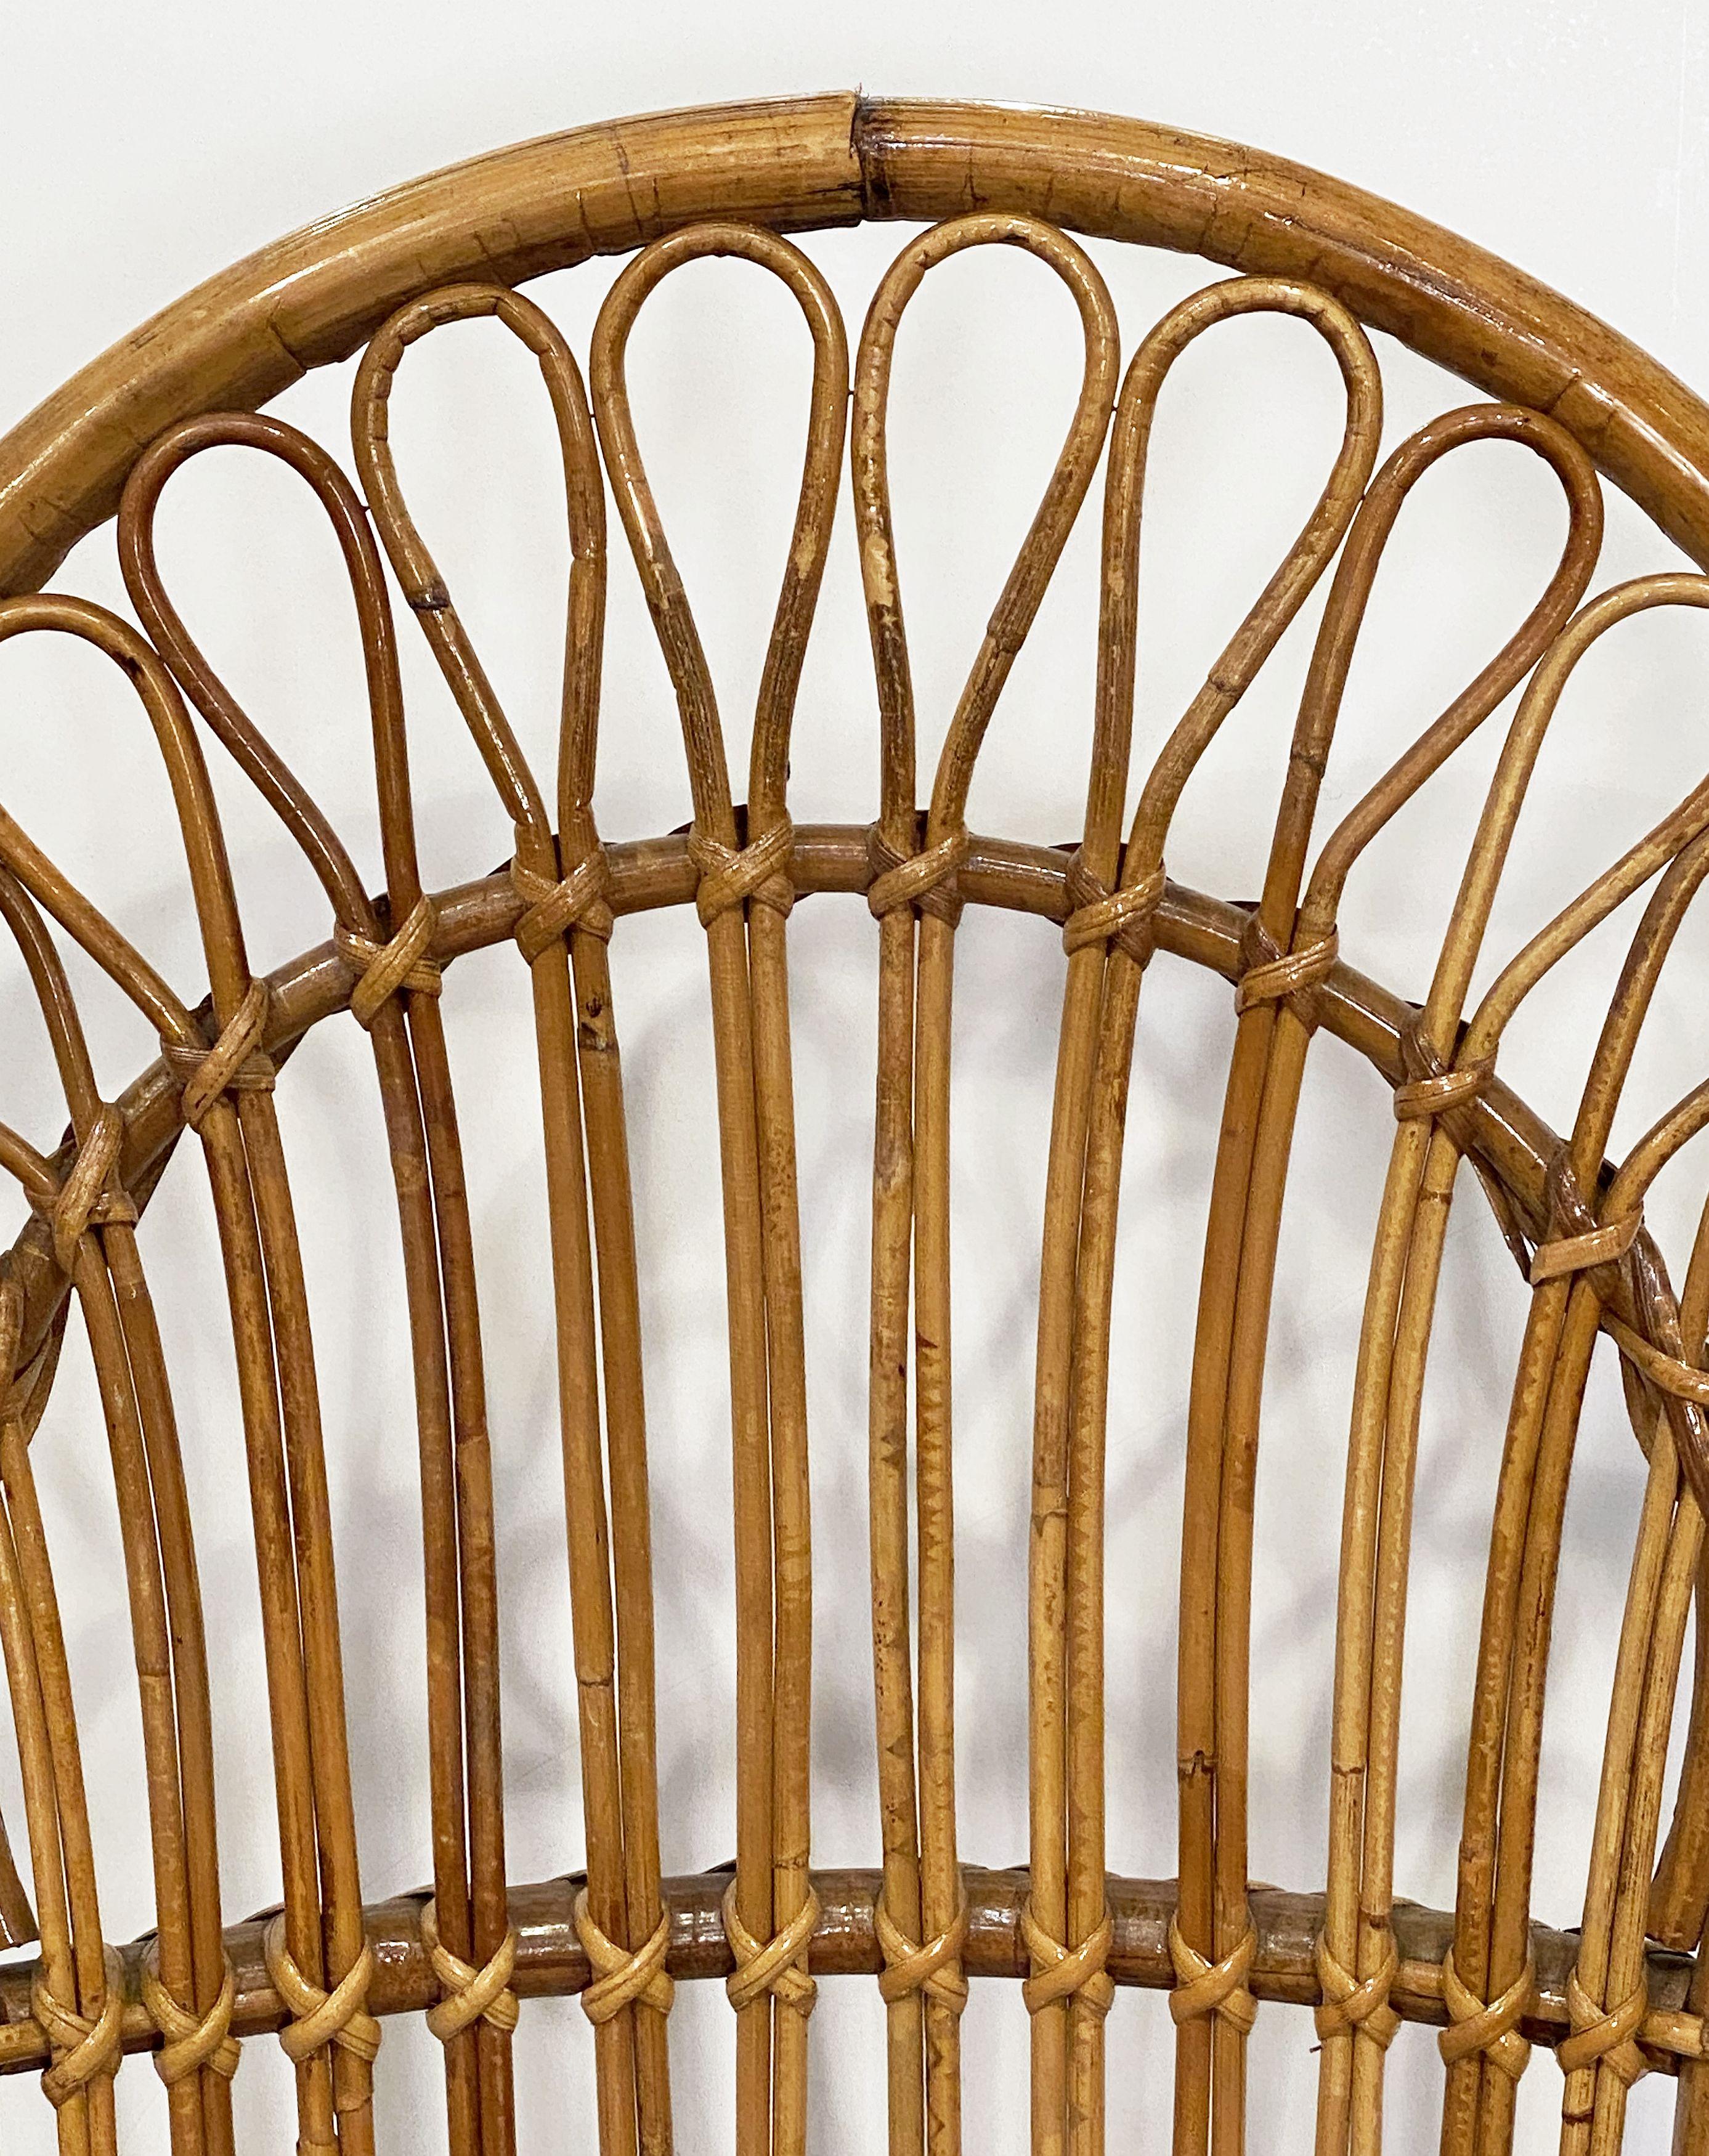 Italian Fan-Backed Chair of Rattan and Bamboo from the Mid-20th Century For Sale 2